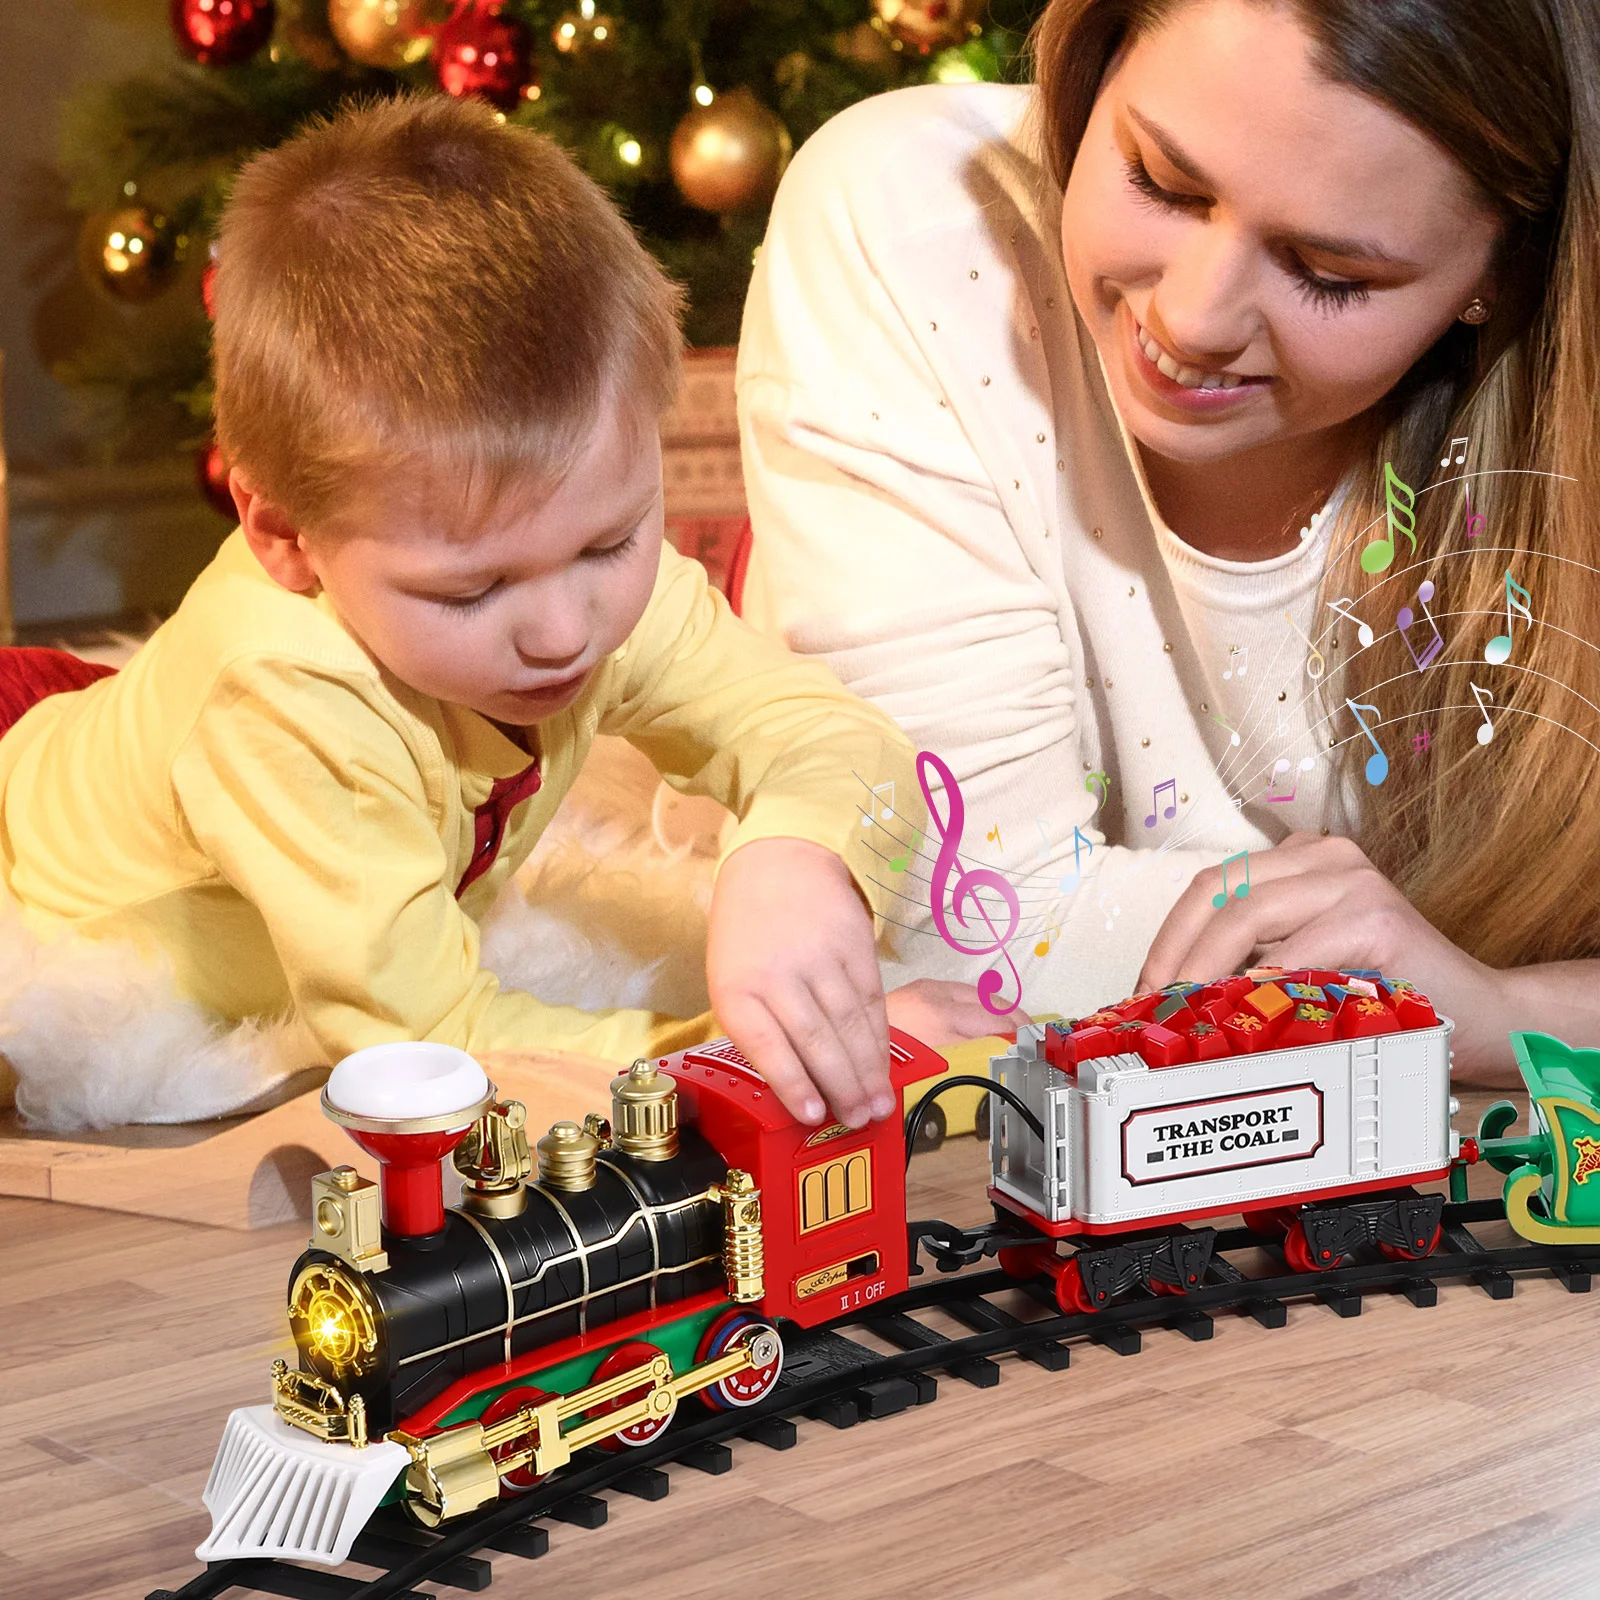 Toyvian Christmas Train Set Electric Train Toy with Sound Light Railway Tracks for Kids Gift Under The Christmas Tree